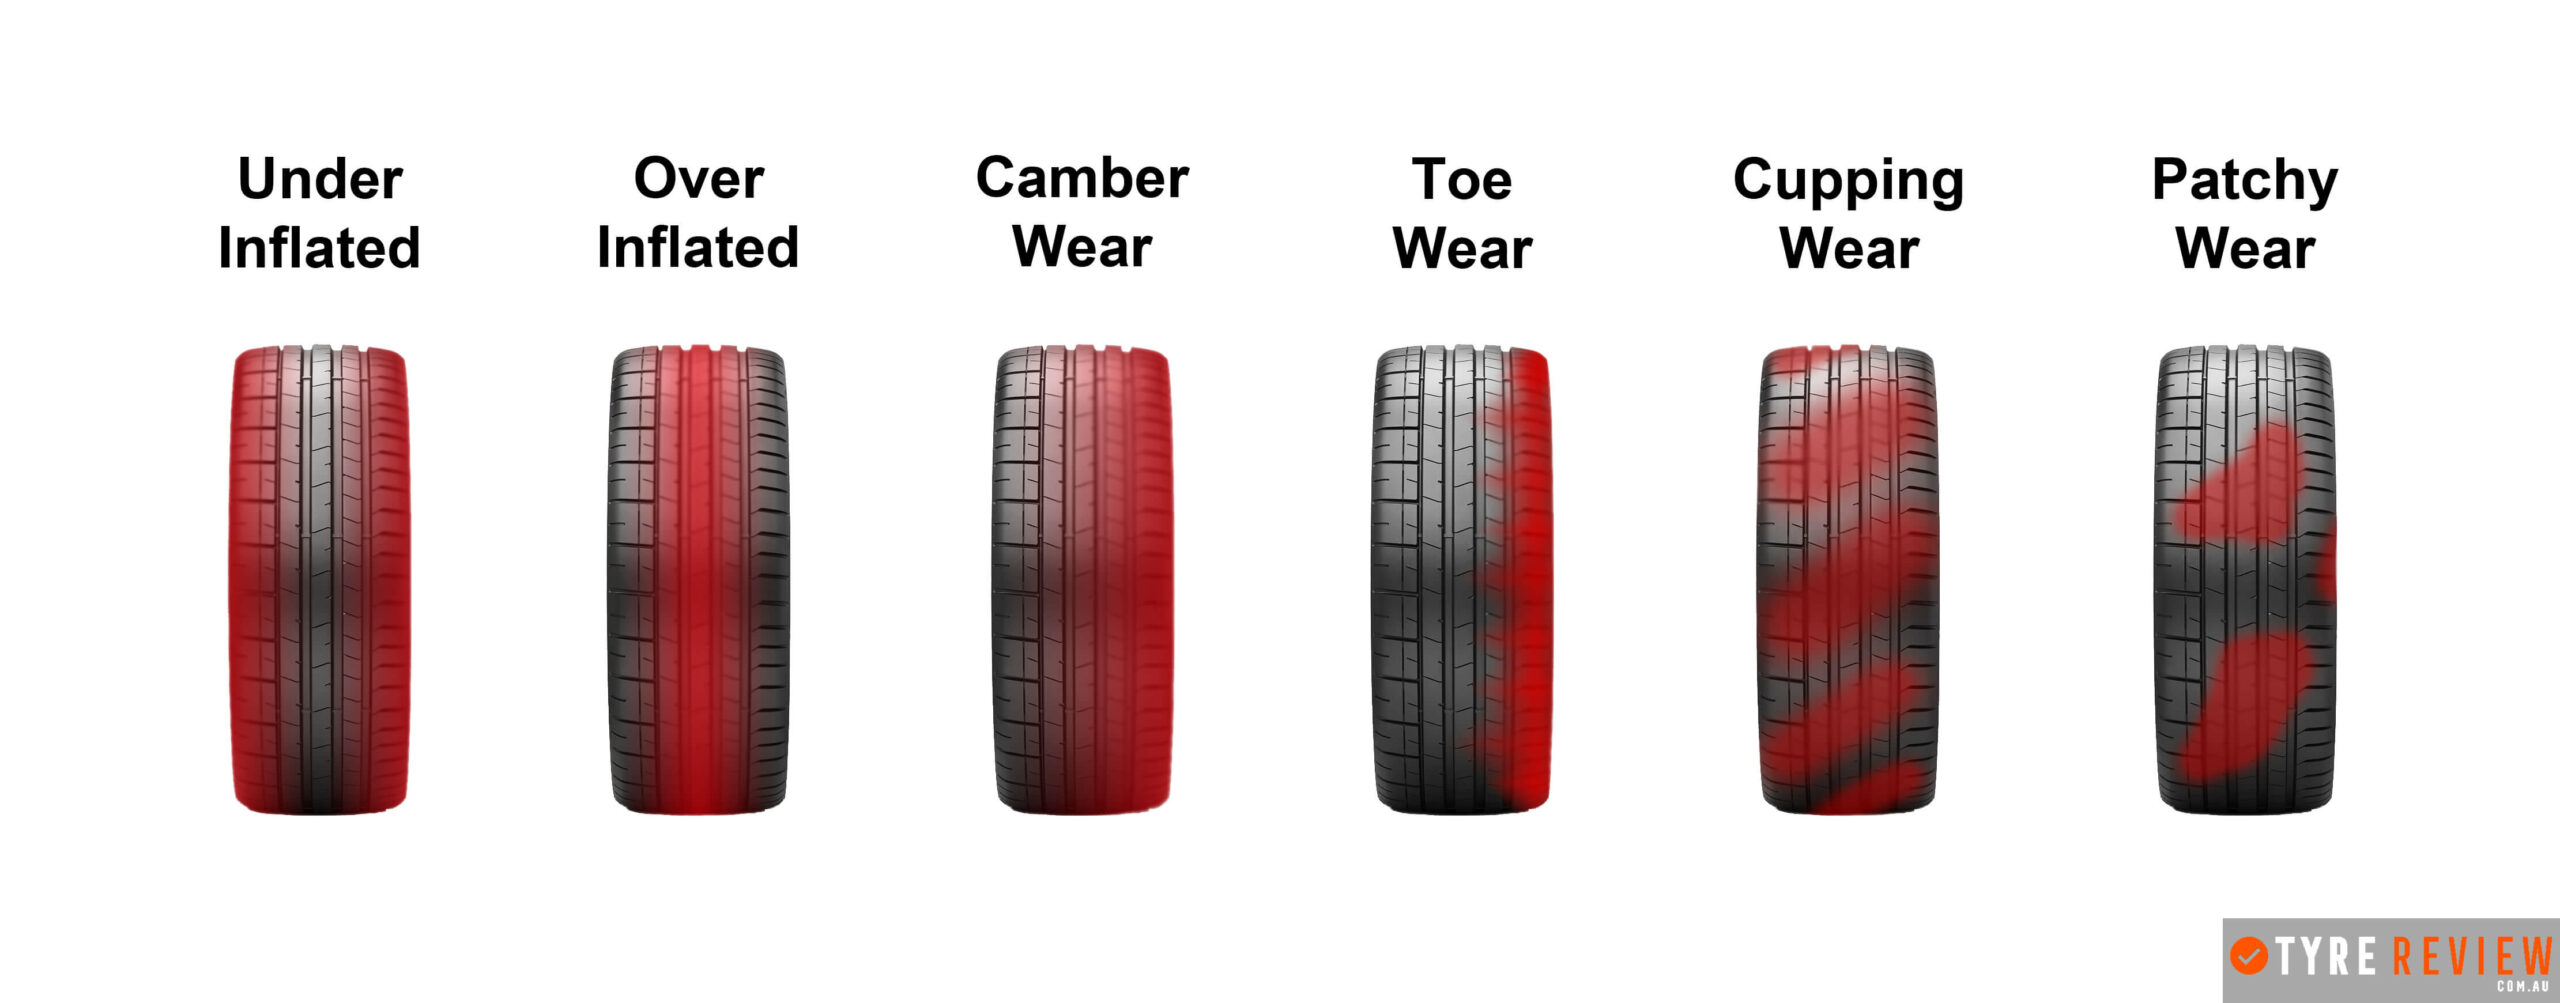 Tyres | Budget Tyre Outlet